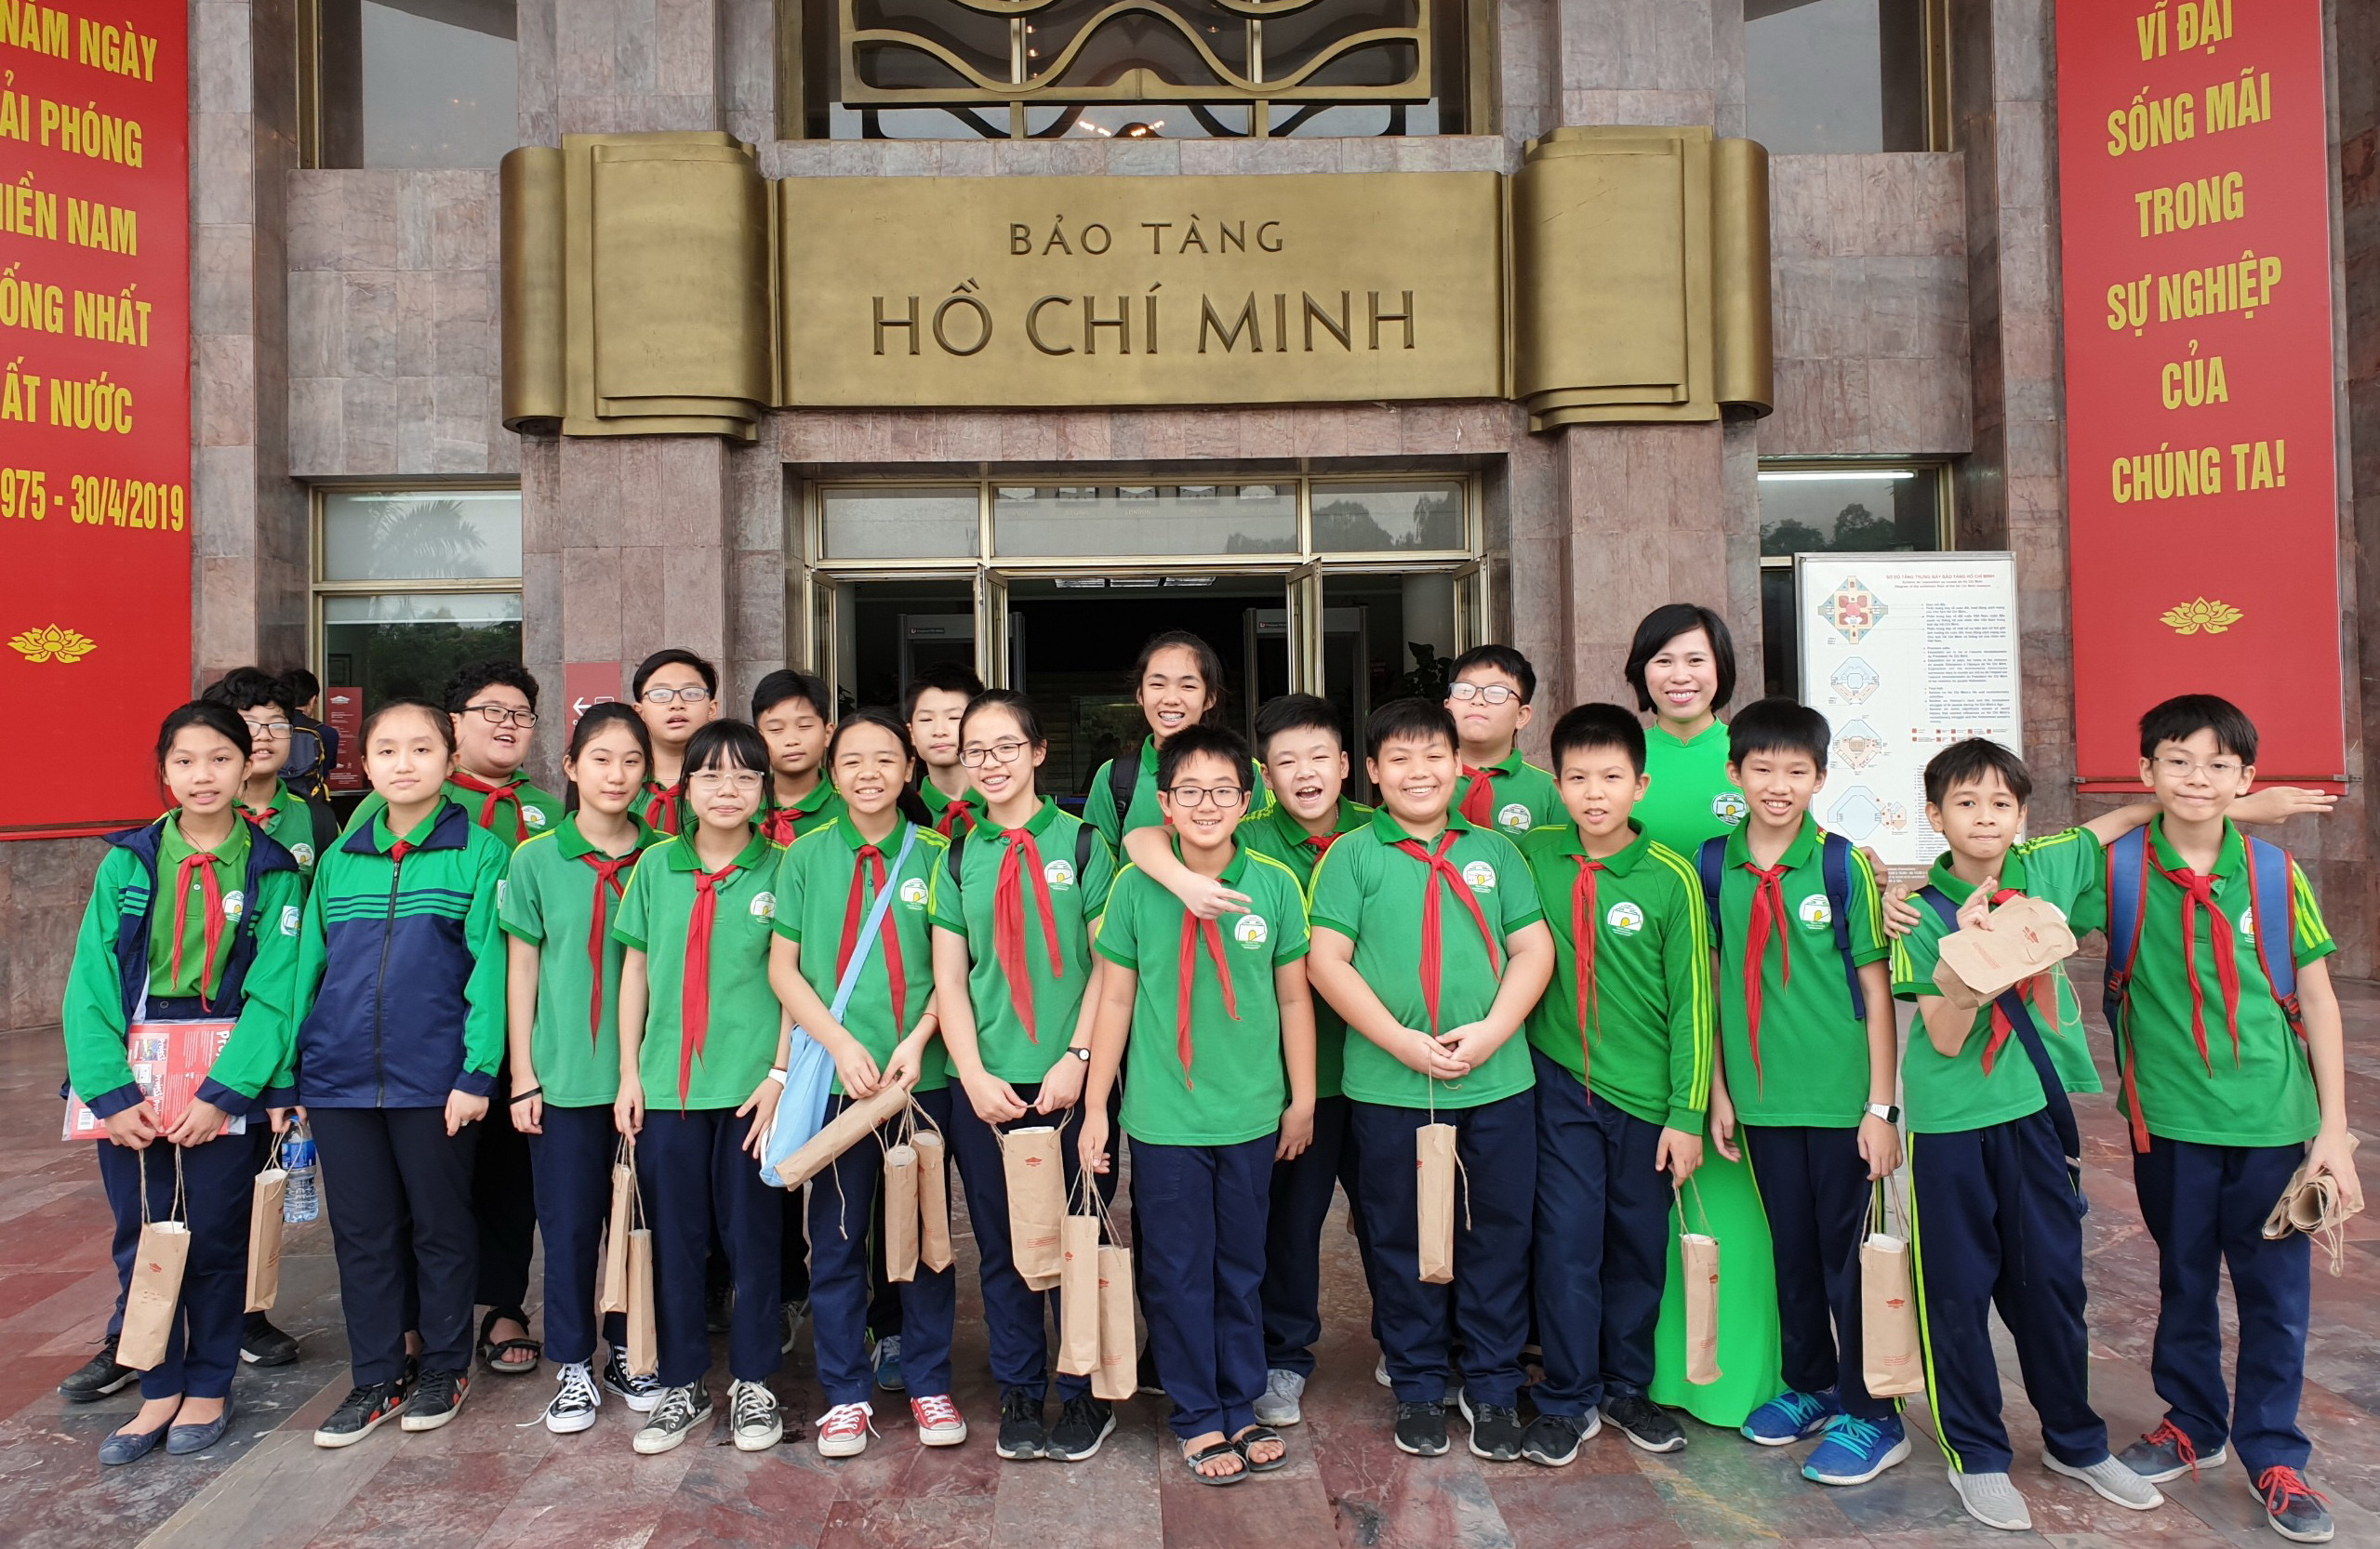 Students of Nguyen Tri Phuong High School are excited at an extracurricular class on Uncle Ho